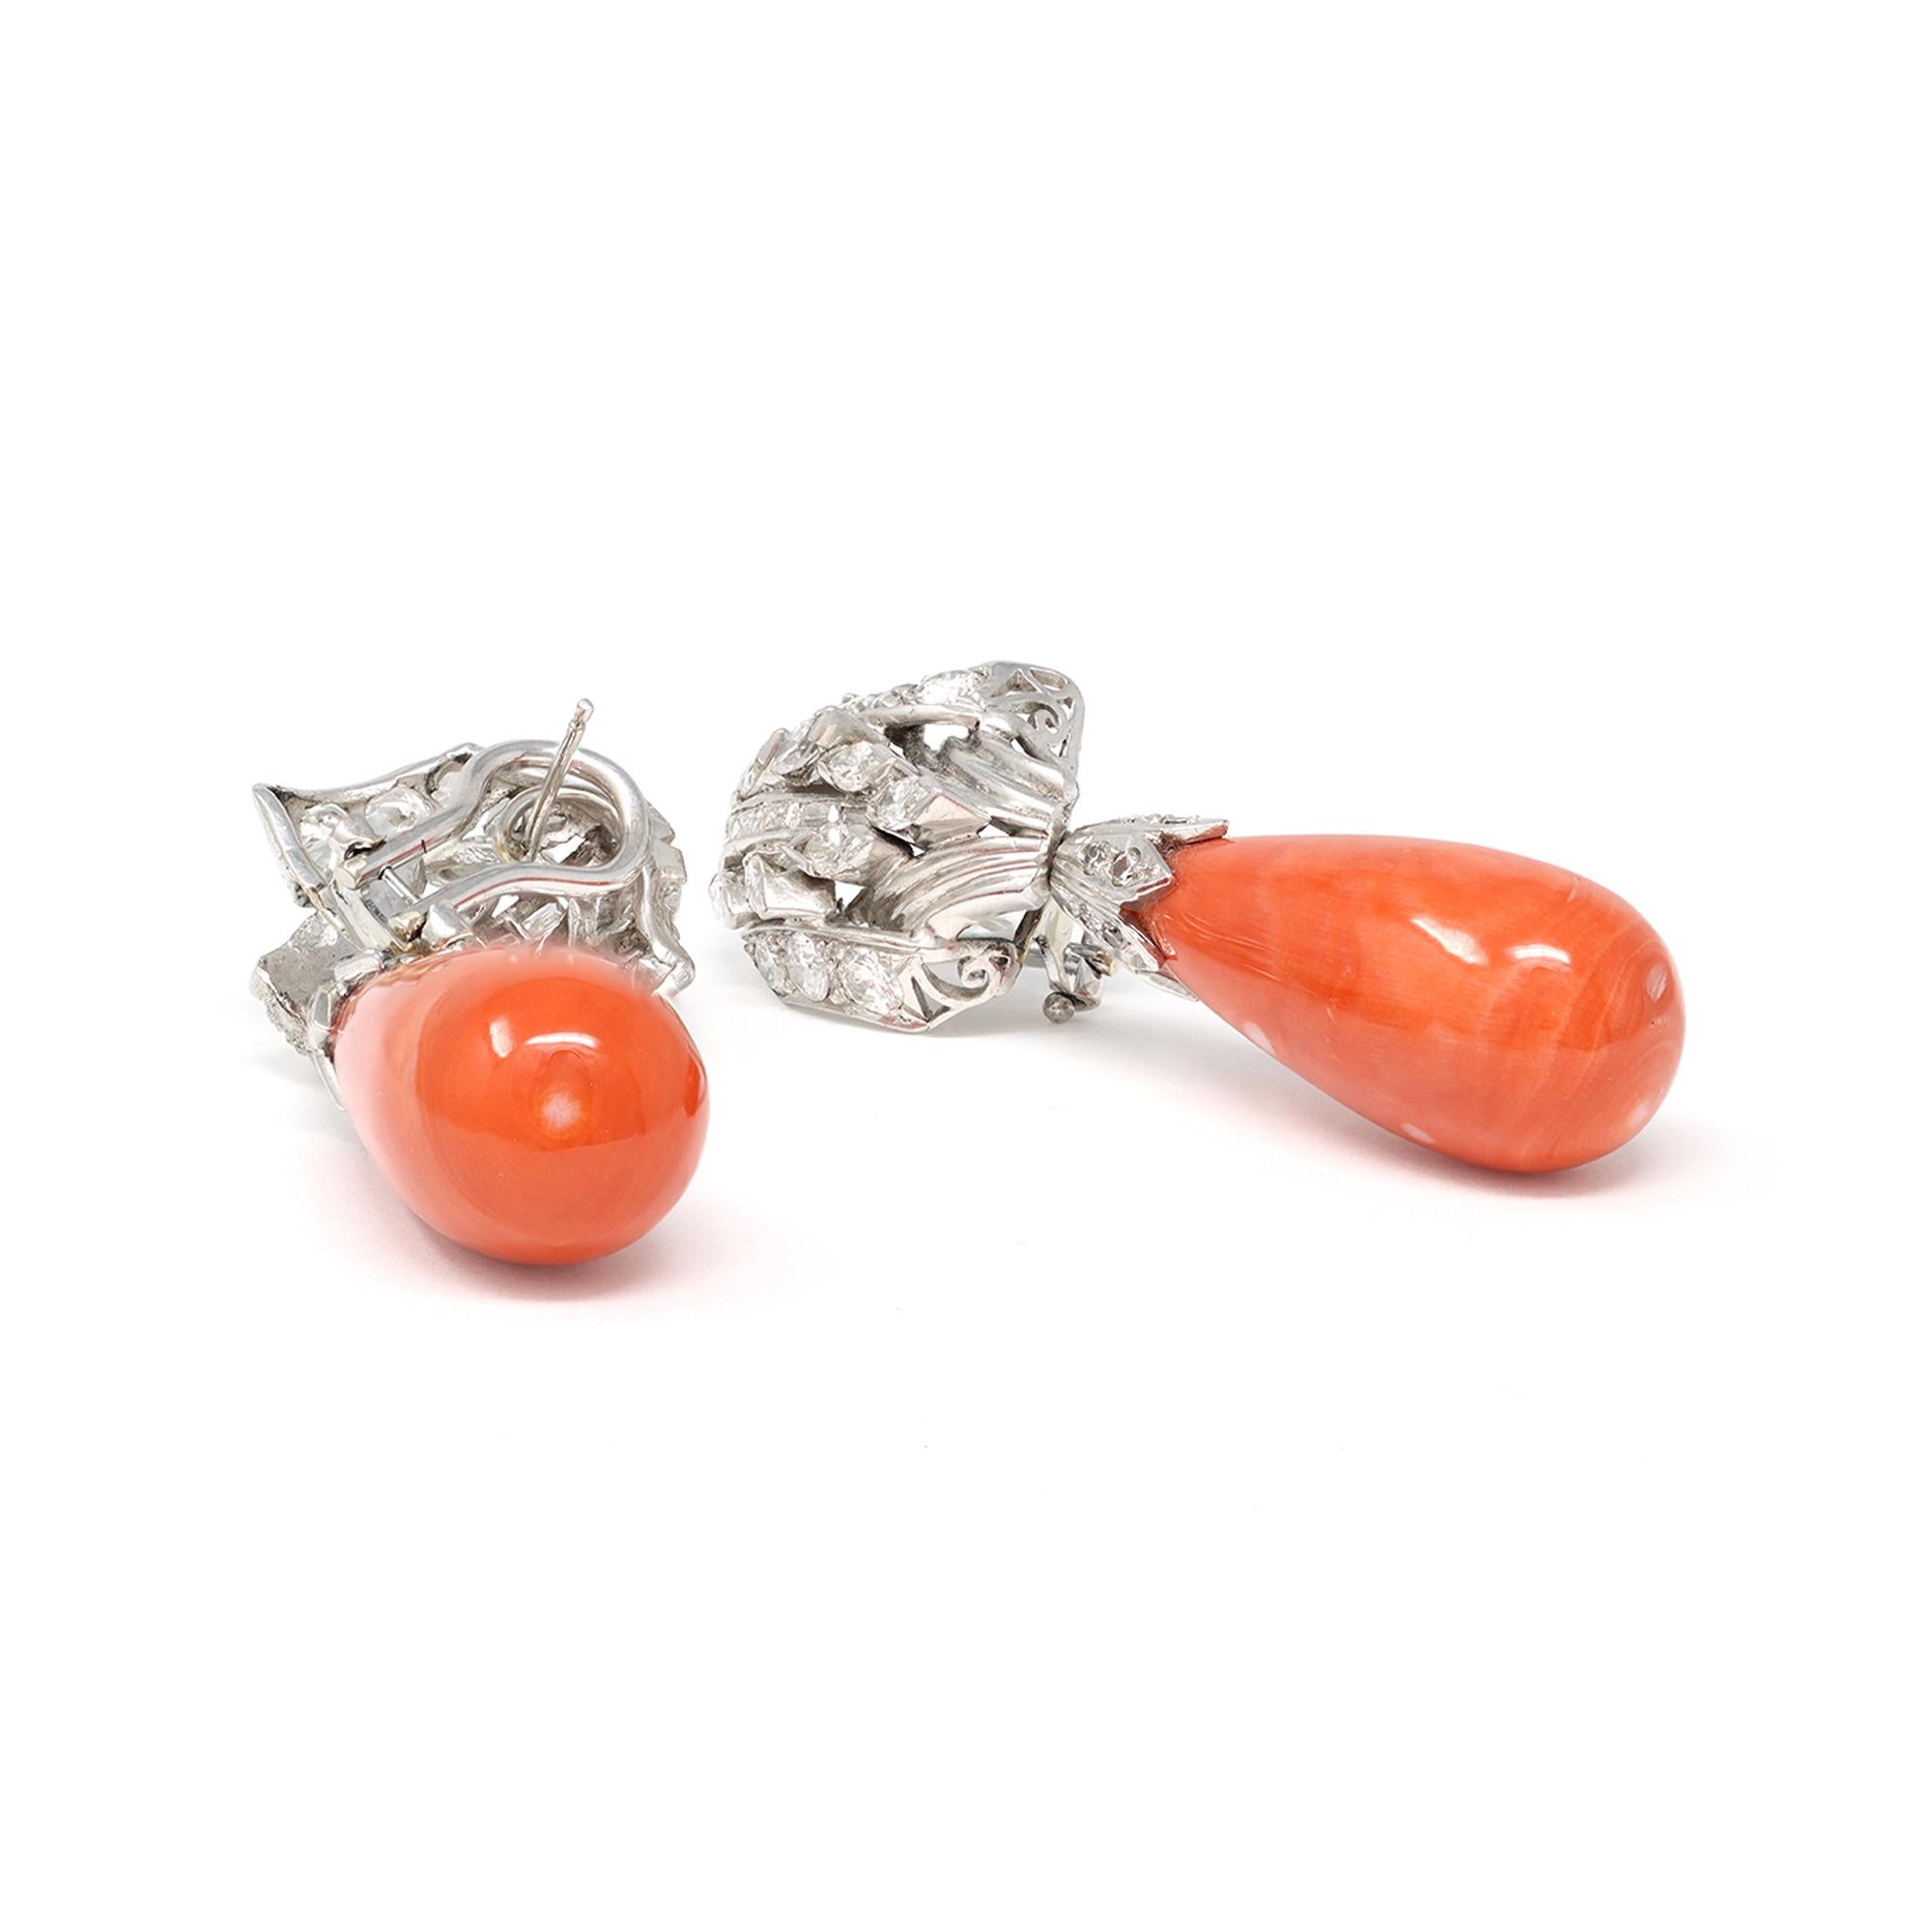 An impressive pair of coral drop dangling earrings with diamonds. Hand made in platinum circa 1950, the earrings have an estimated weight of 3.20 carats of diamonds GH color and VS-SI clarity. The coral drops are natural color with no indication of